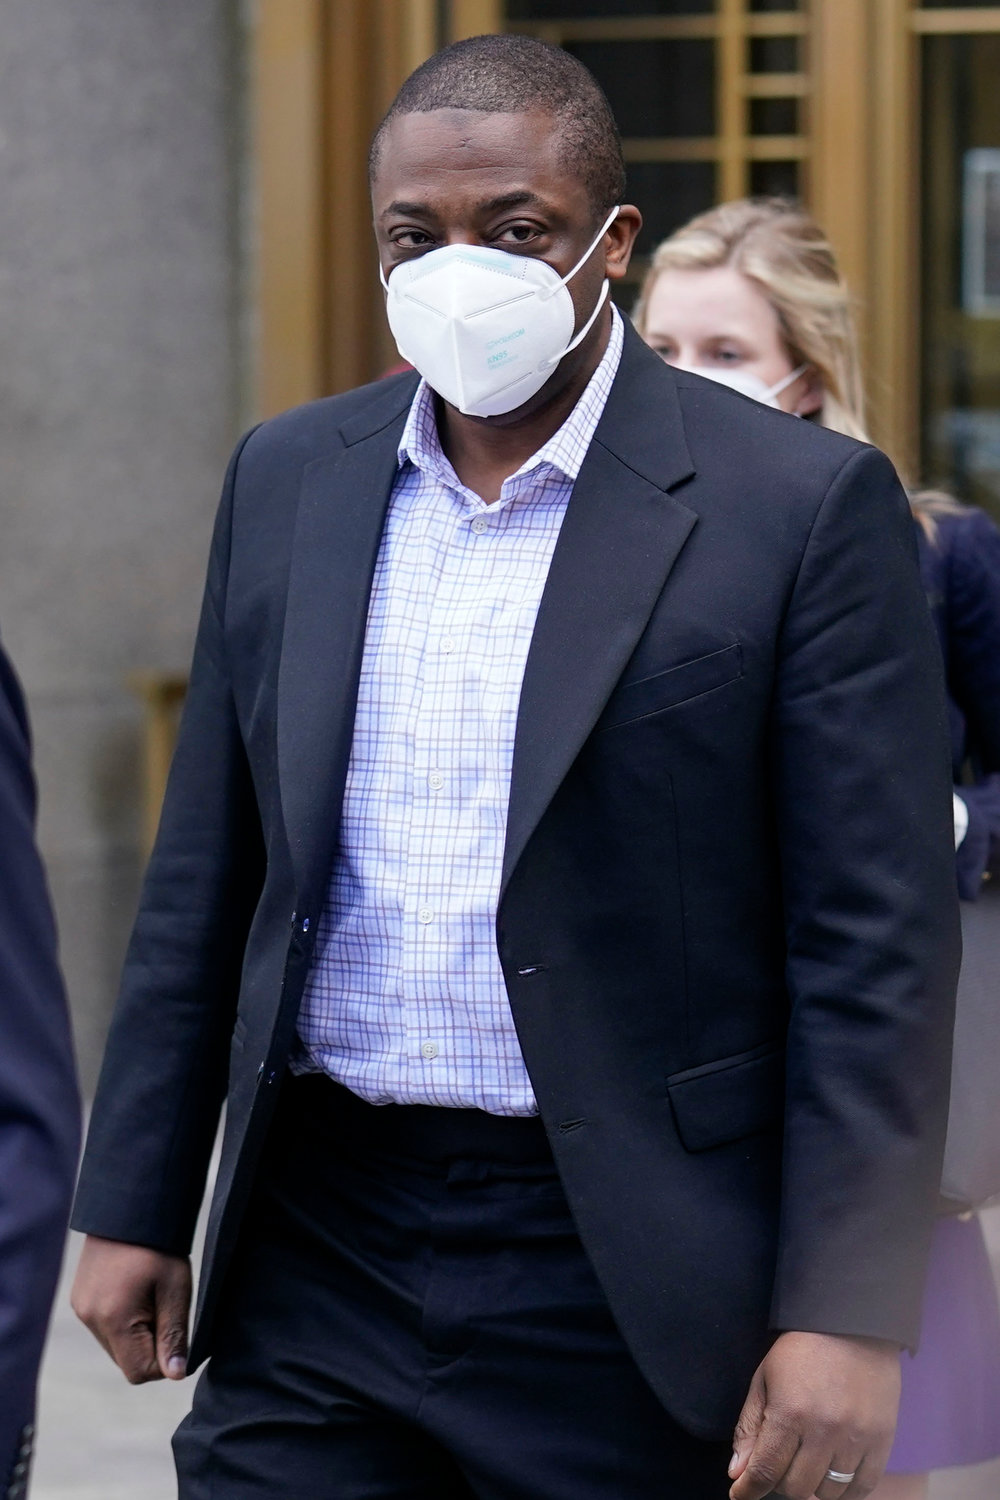 New York Lt. Gov. Brian Benjamin leaves the courthouse in New York, Tuesday, April 12, 2022. Benjamin has been arrested in a federal corruption investigation. Authorities said the Democrat was arrested Tuesday on charges including bribery and falsification of records. (AP Photo/Seth Wenig)